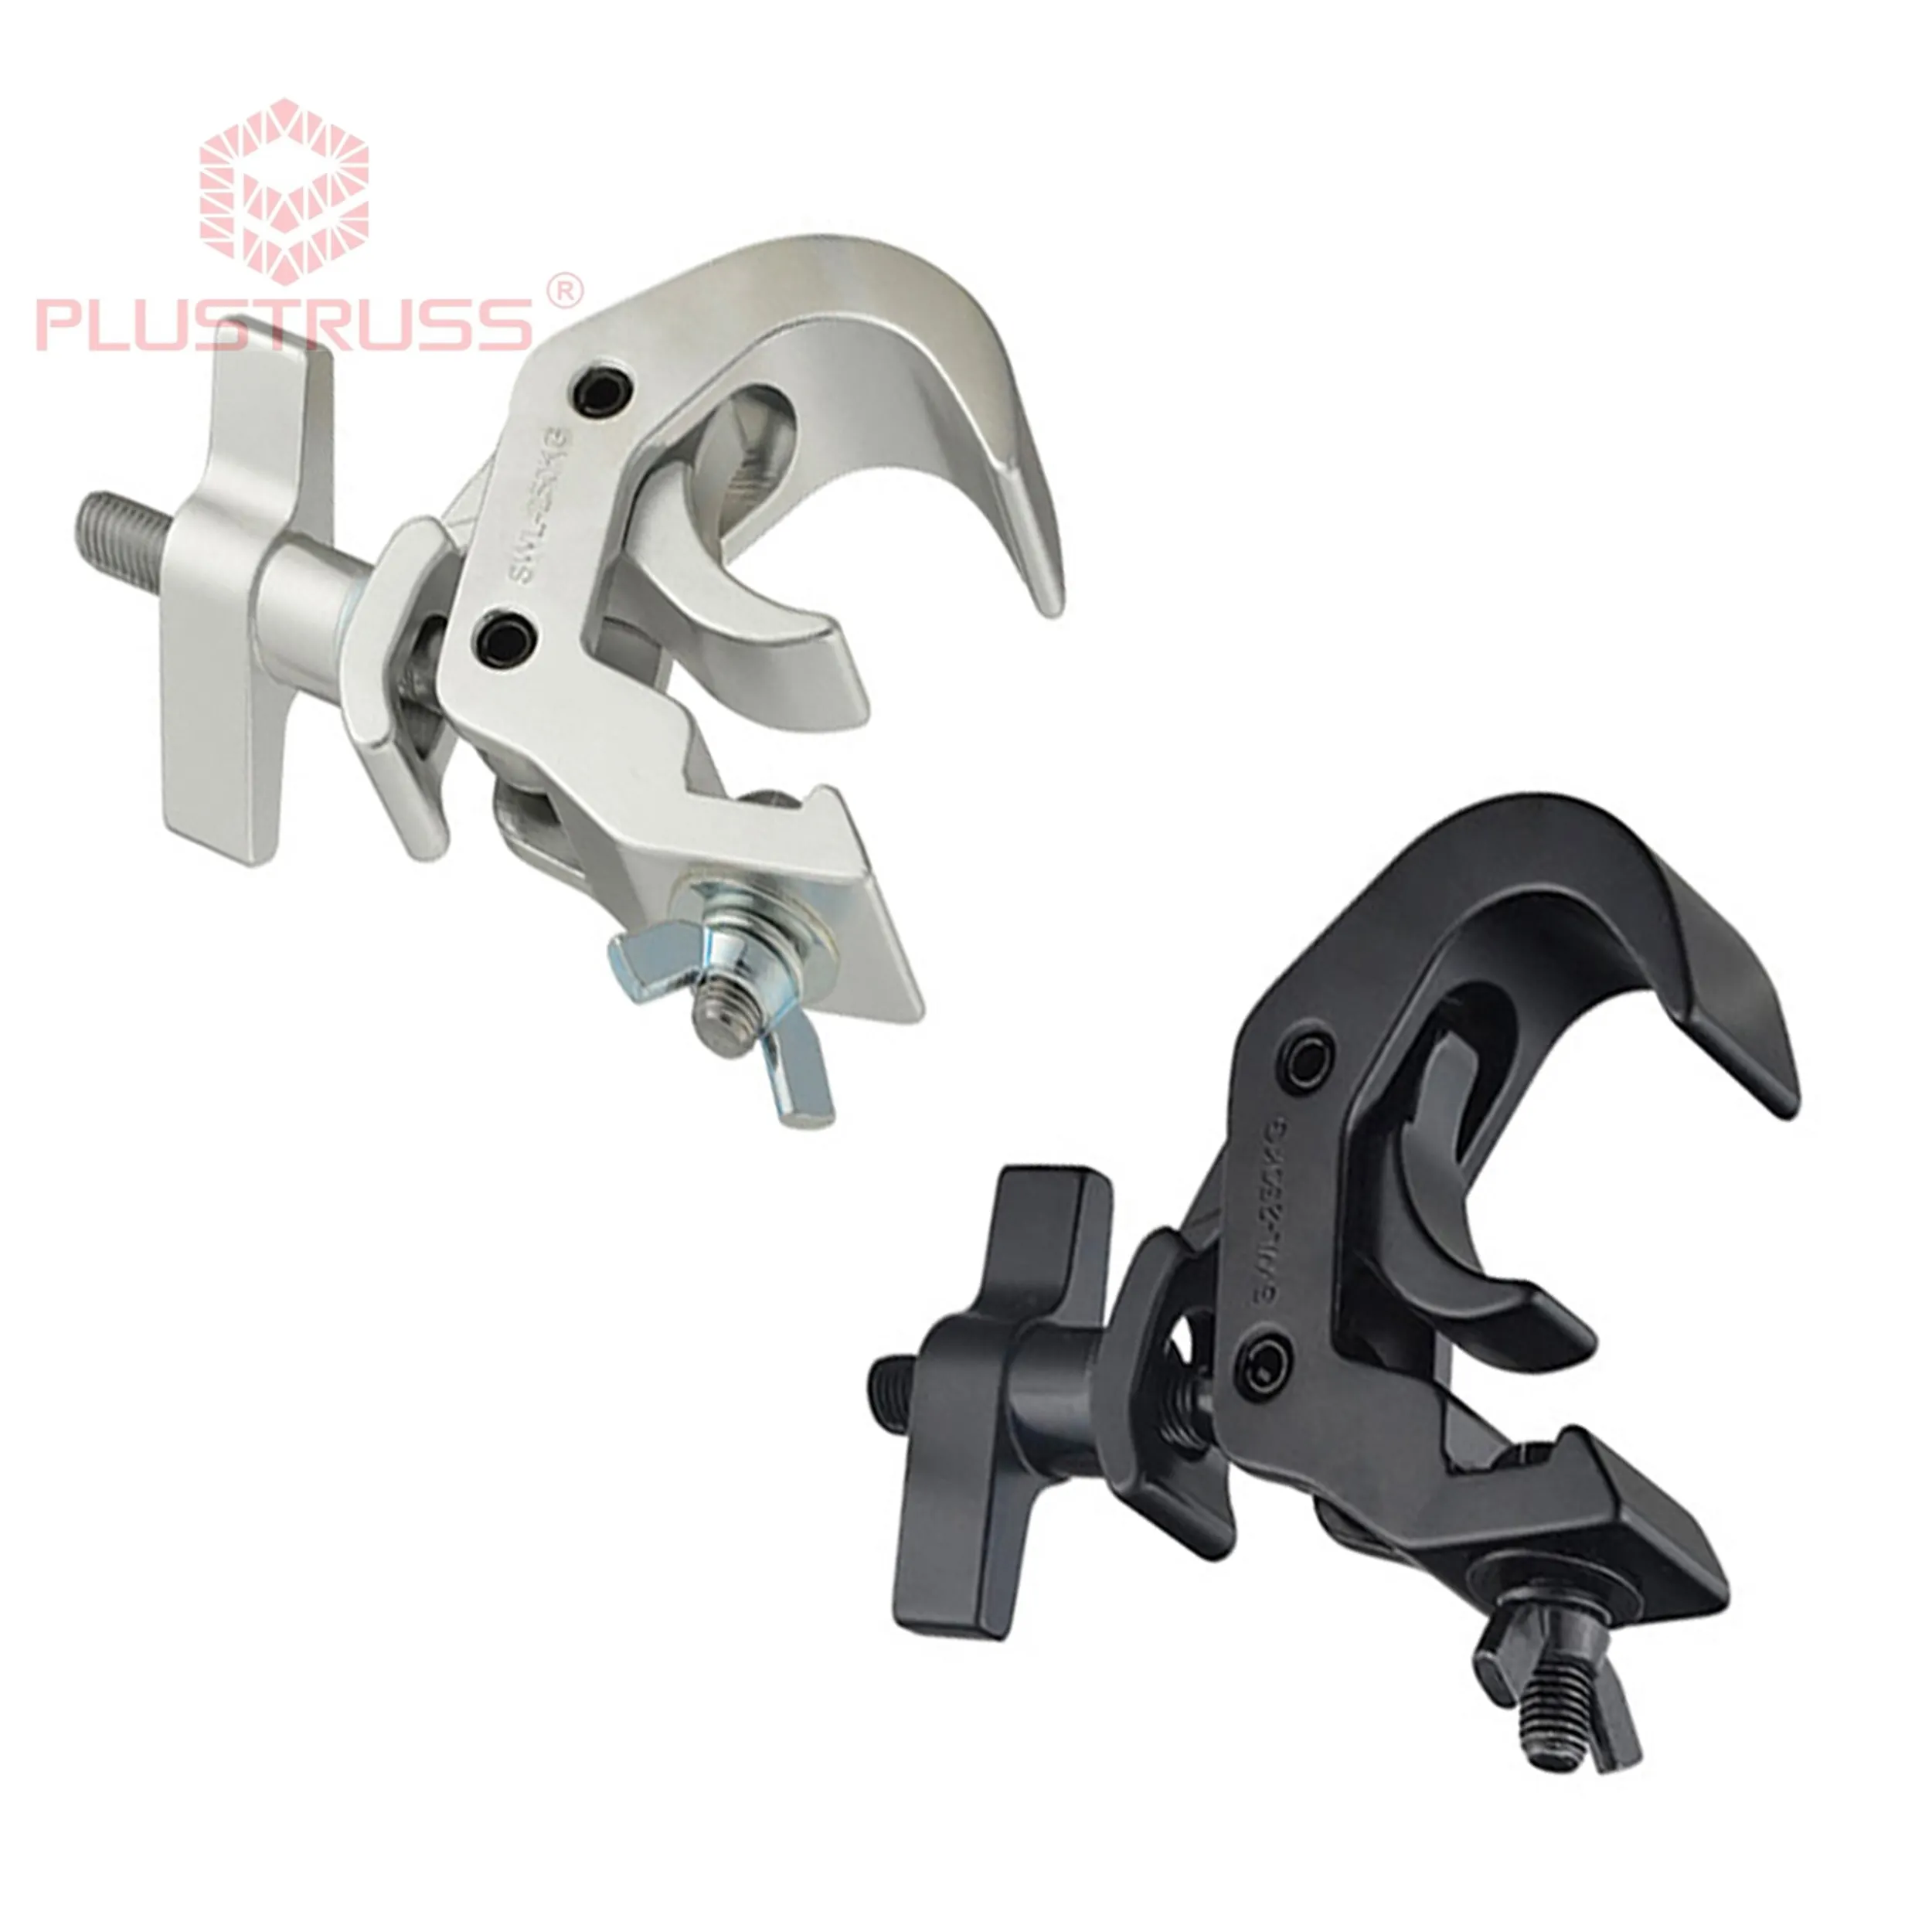 Tube 48-51mm Load 250kg Pipe Clamp Truss Hook Aluminum Stage Lighting Truss Clamp Hook Quick Rig Clamp G5005